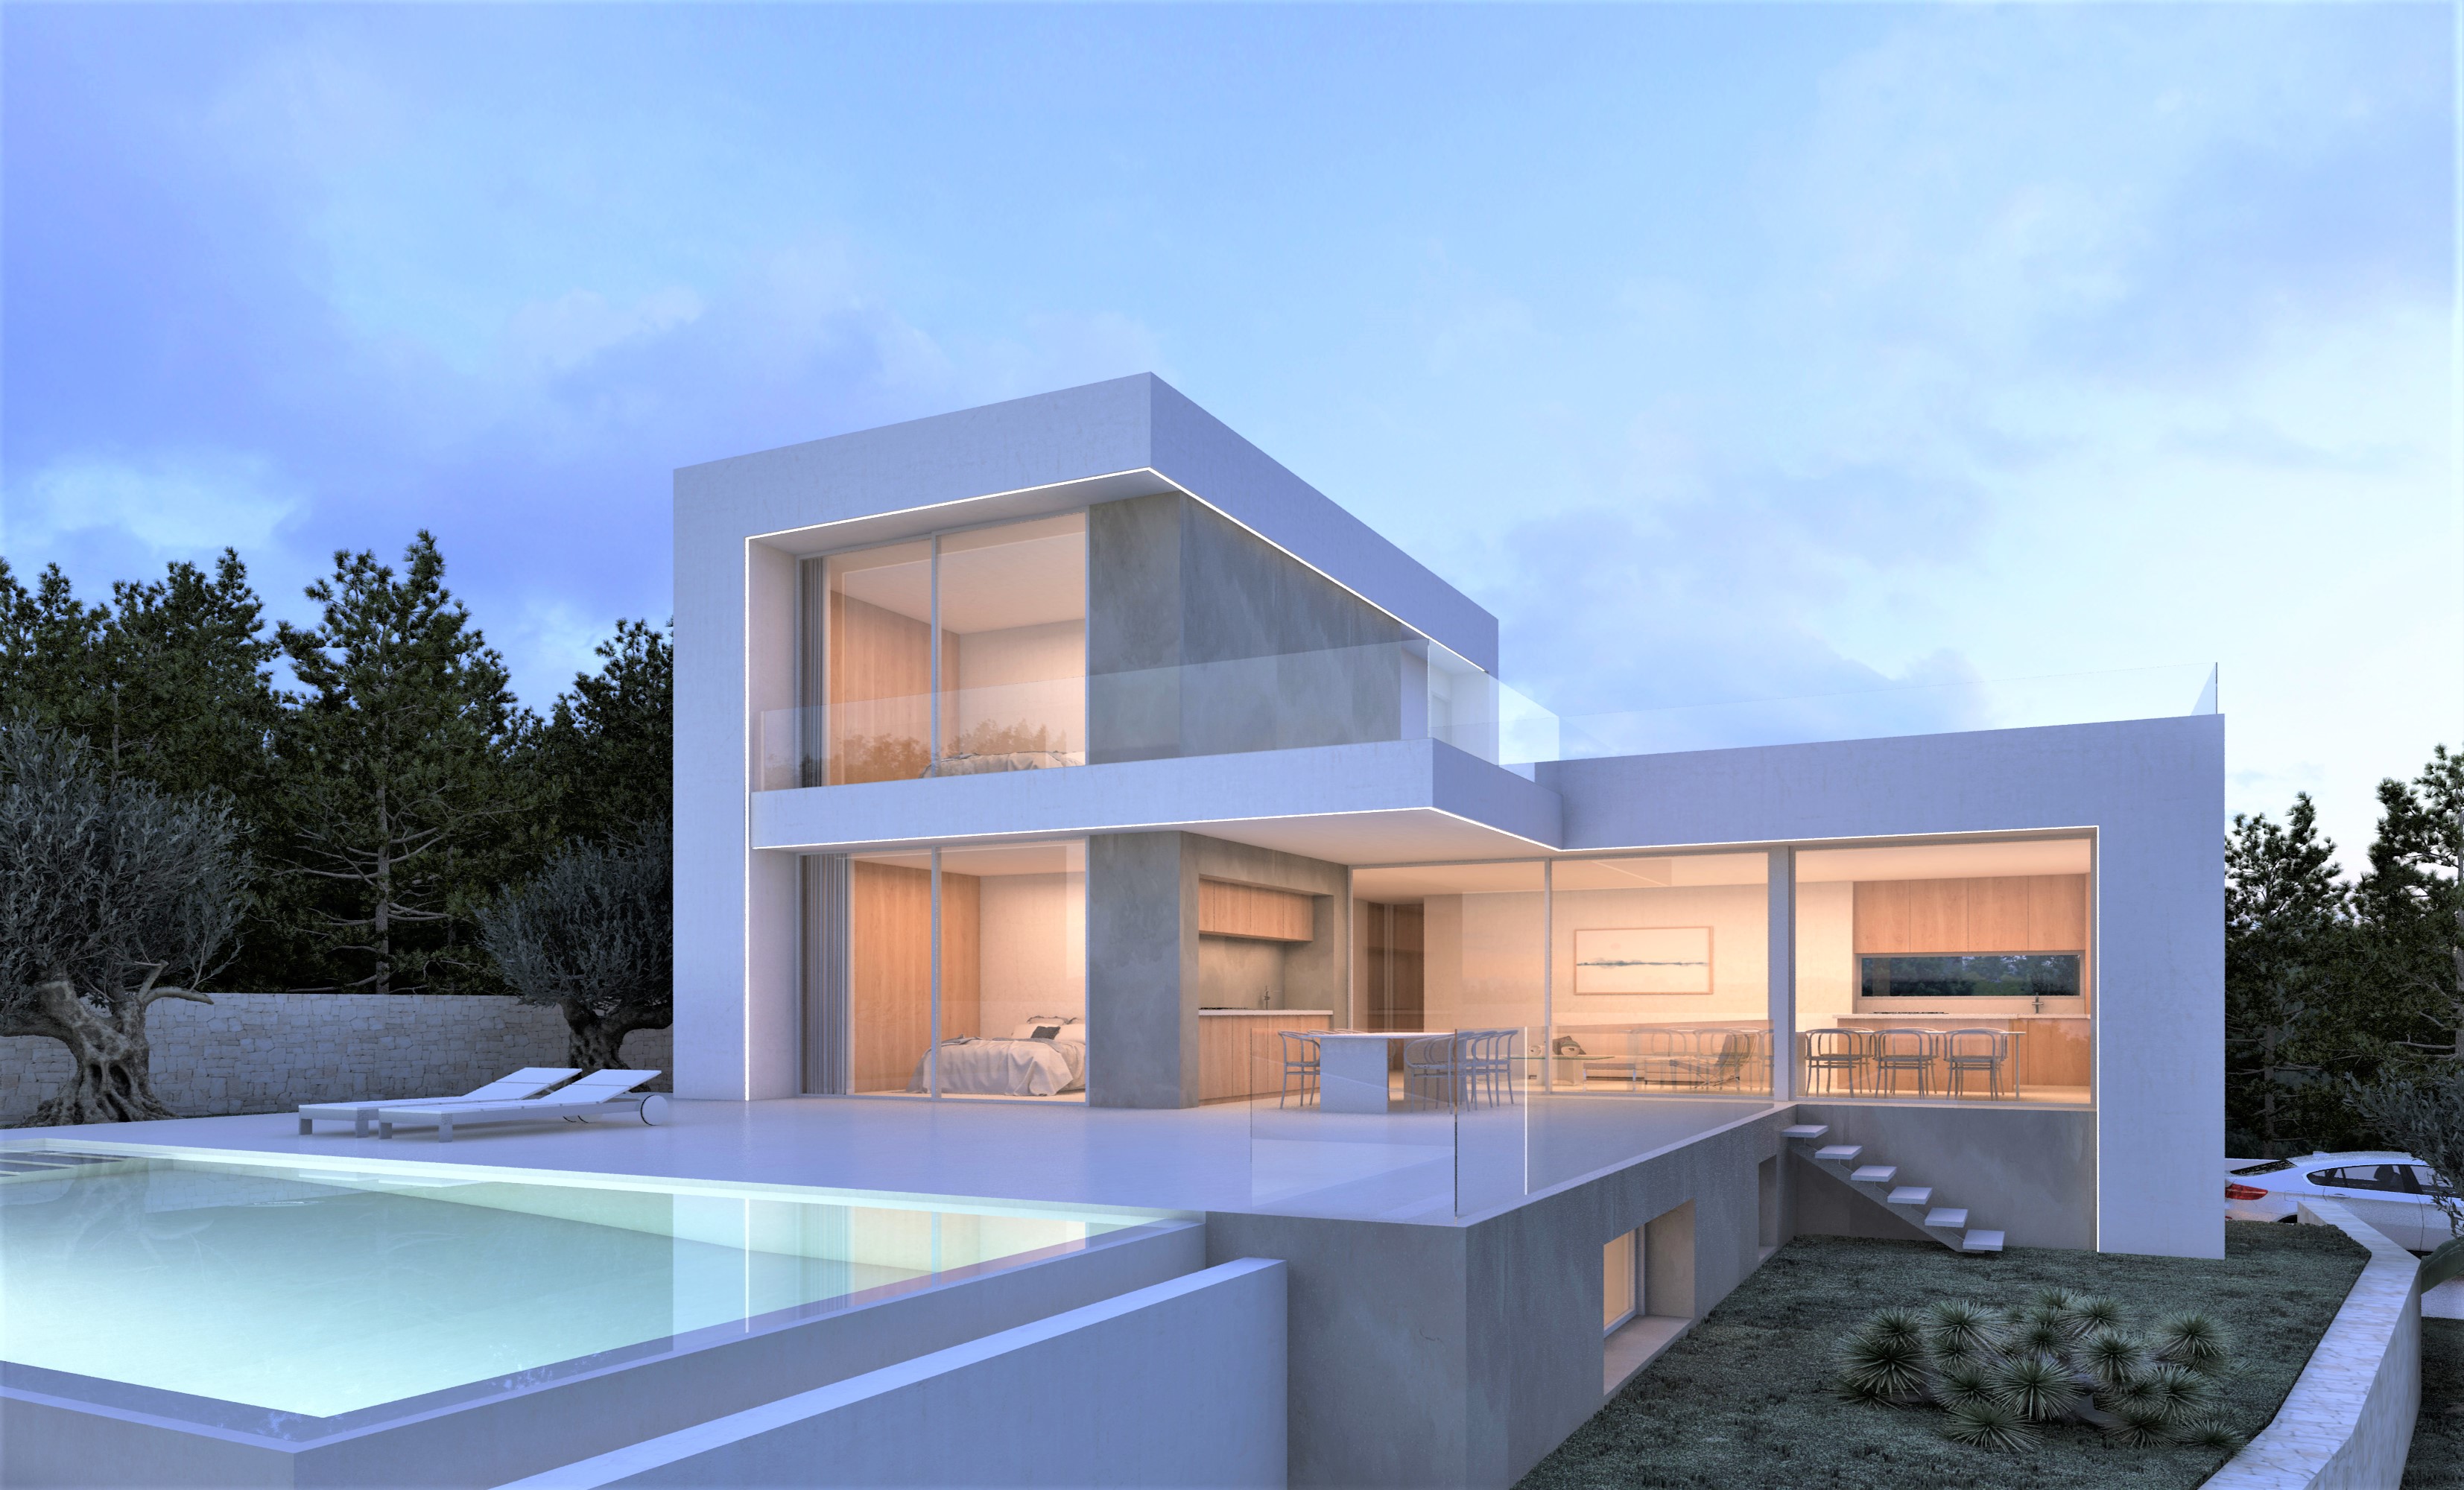 A new build project in Benissa Costa